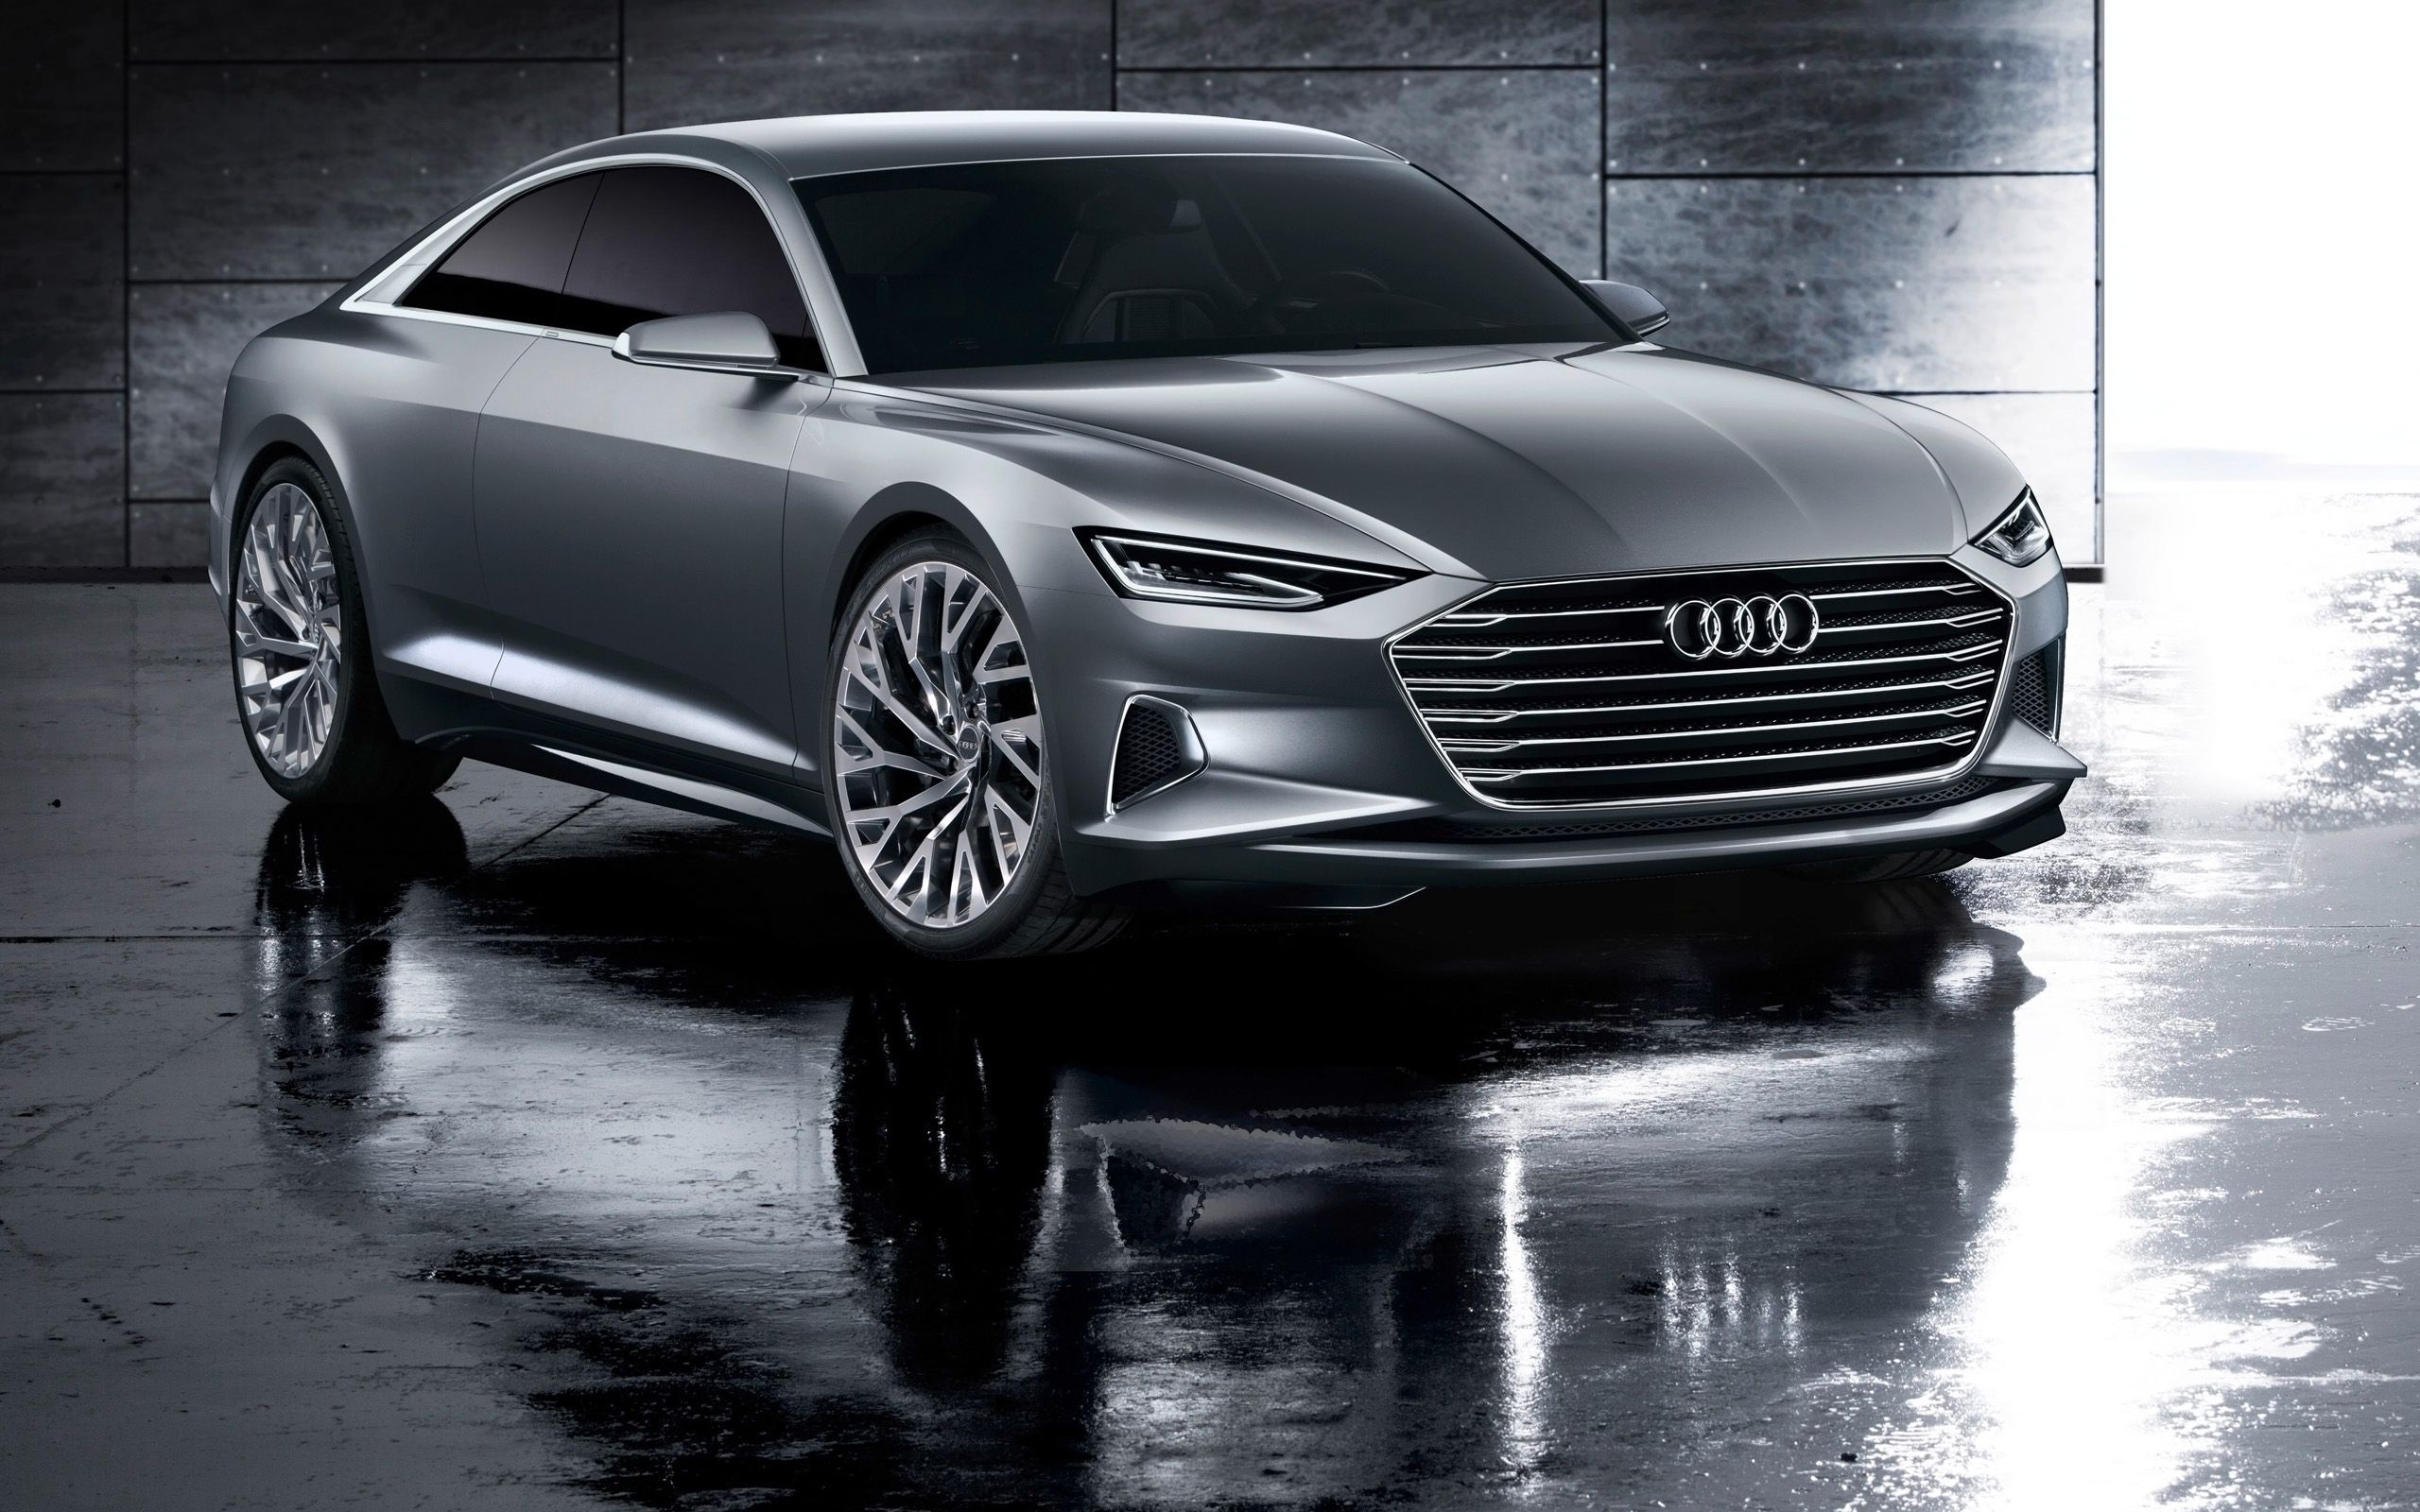 Audi Concept Cars And New Designs For Wallpaper